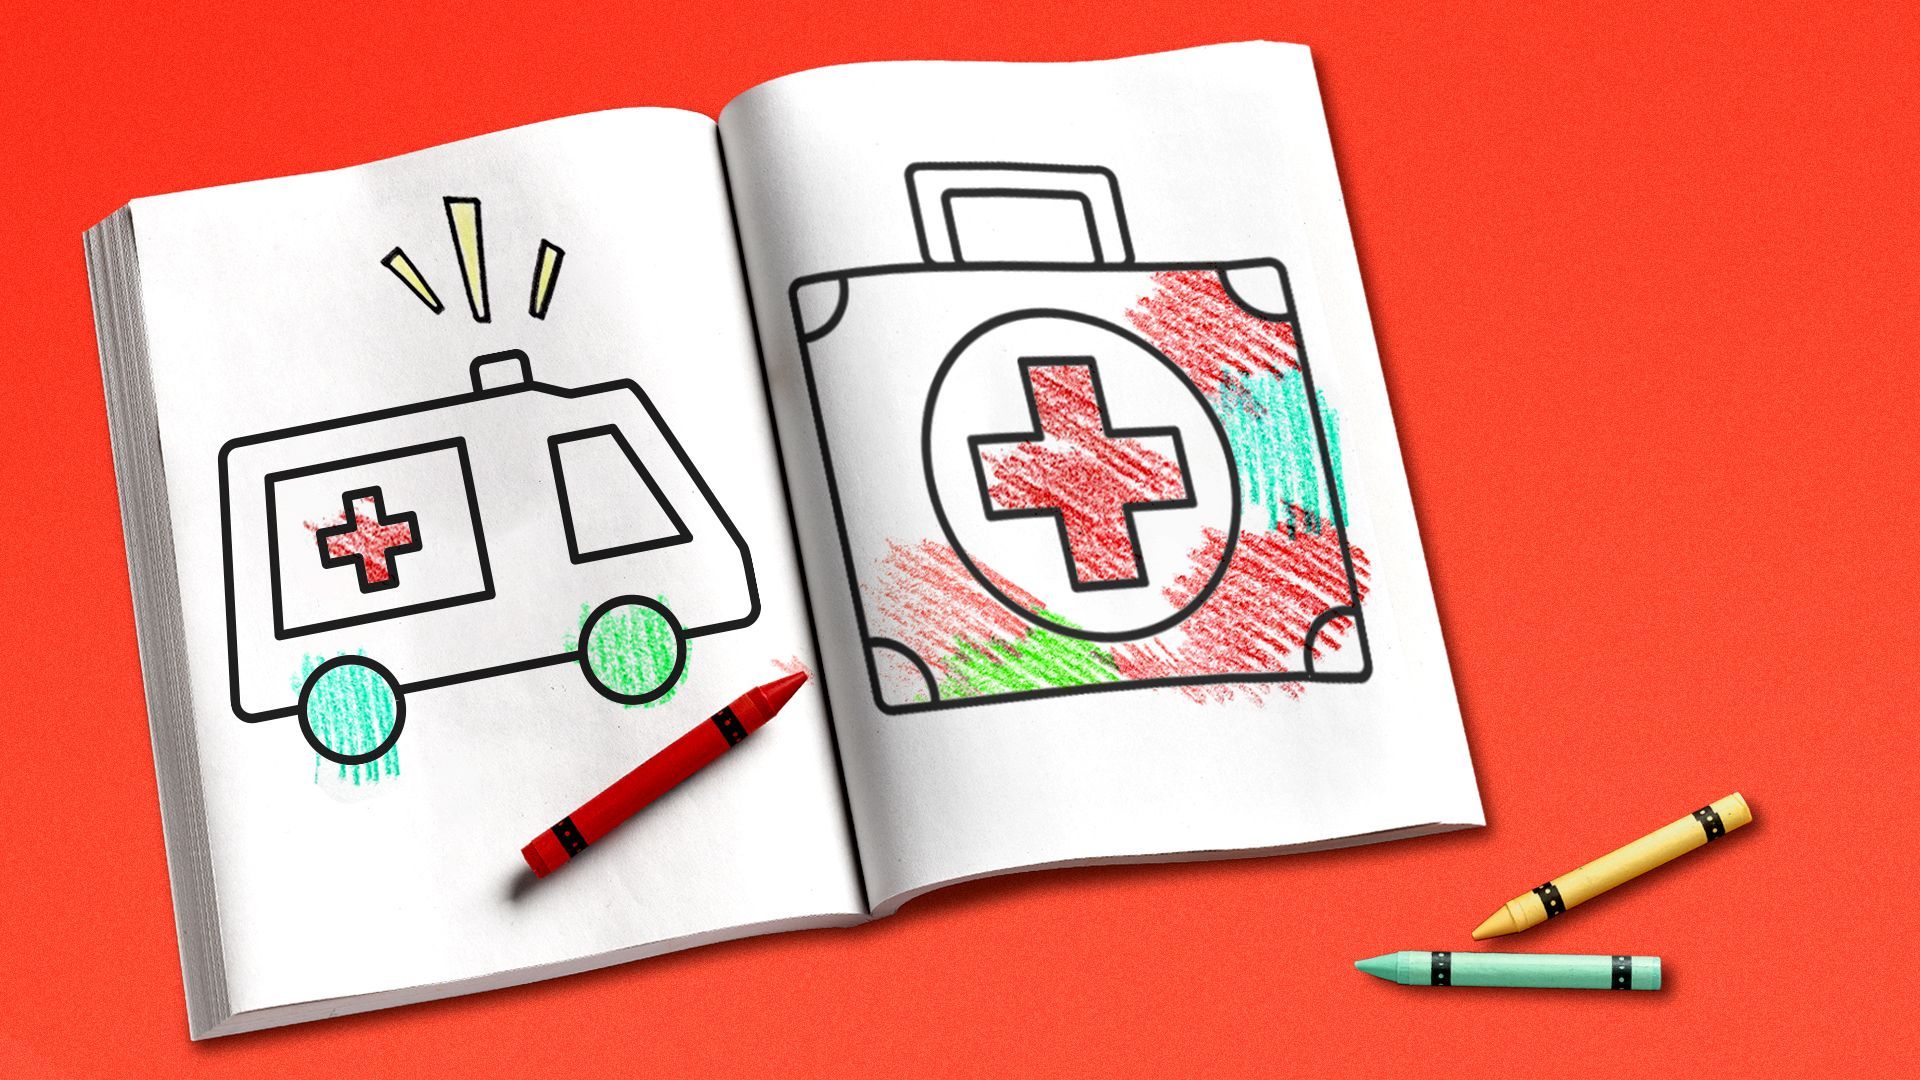 Illustration of some crayons next to a children's coloring book featuring a partially colored ambulance on one page and a colored medical bag on the opposite page.